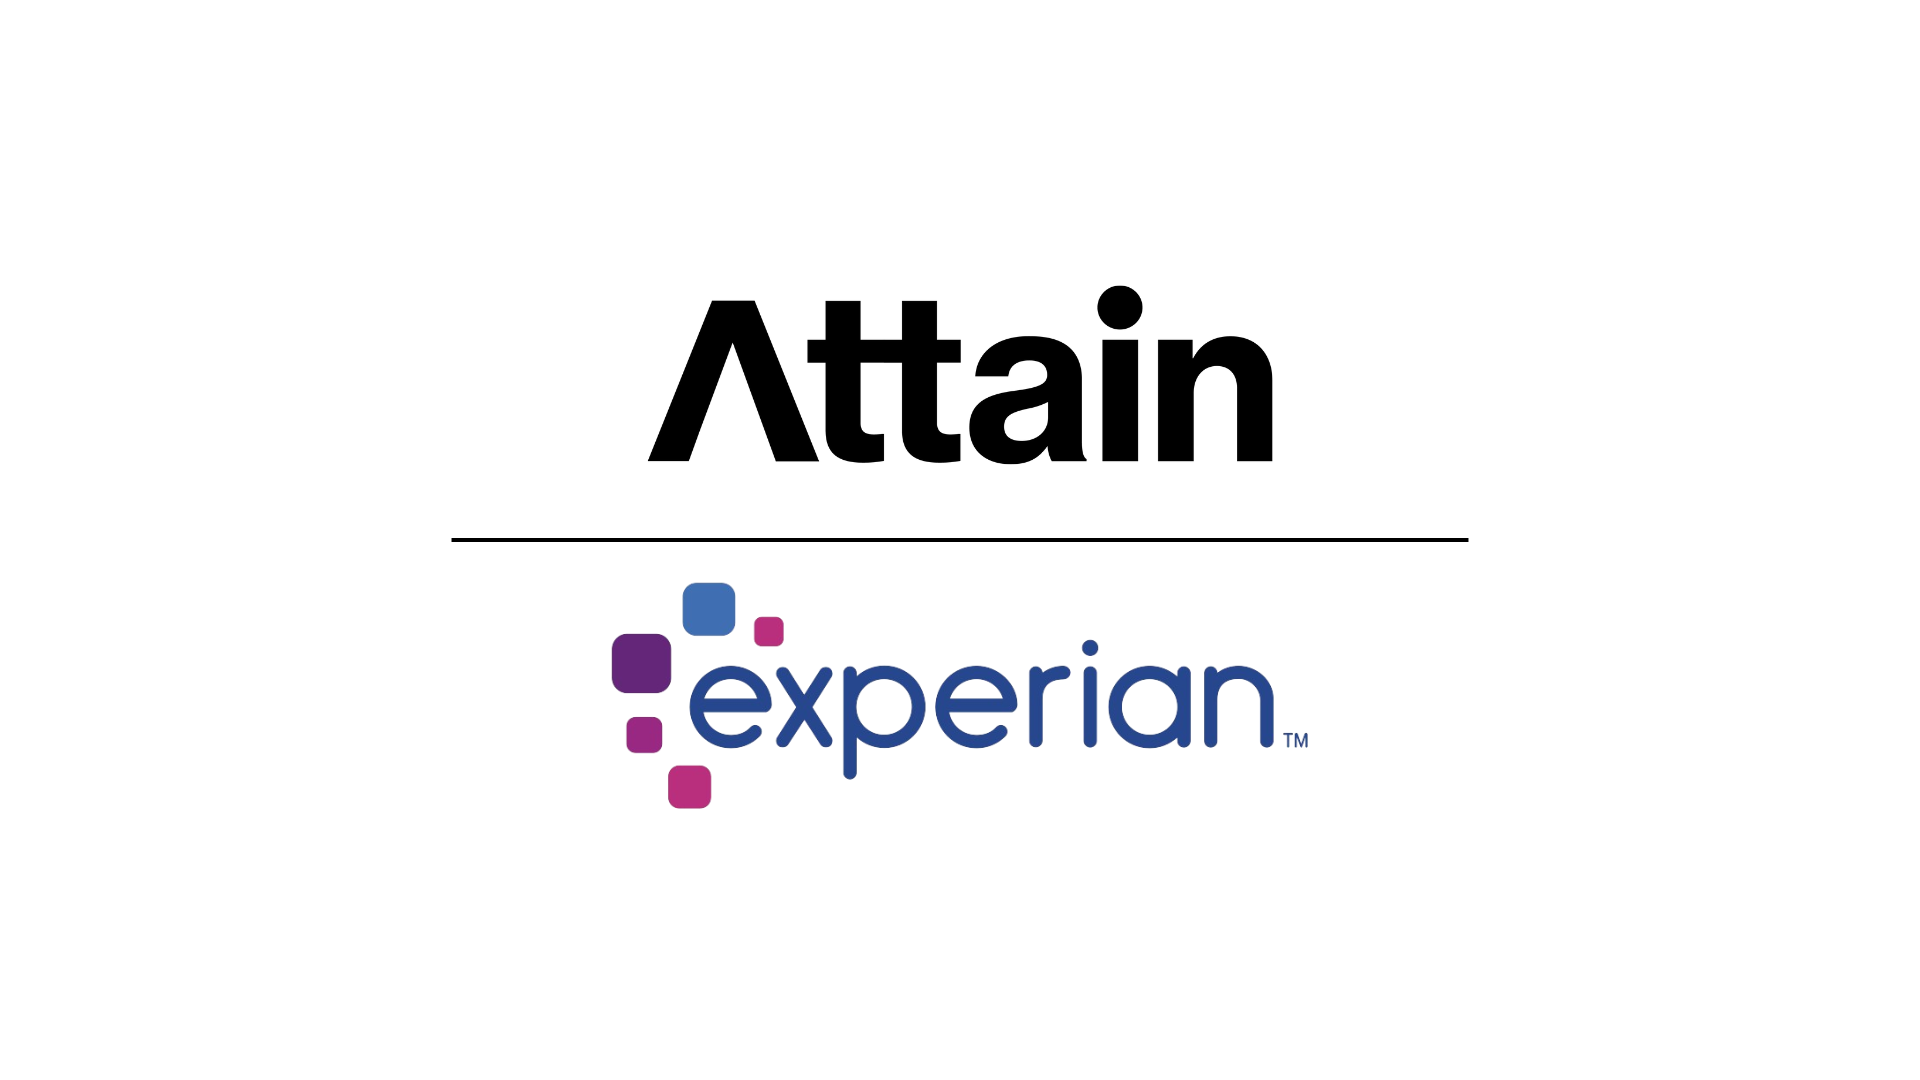 Attain and Experian Collaborate to Help Unlock Cross-Device Outcomes for Advertisers 